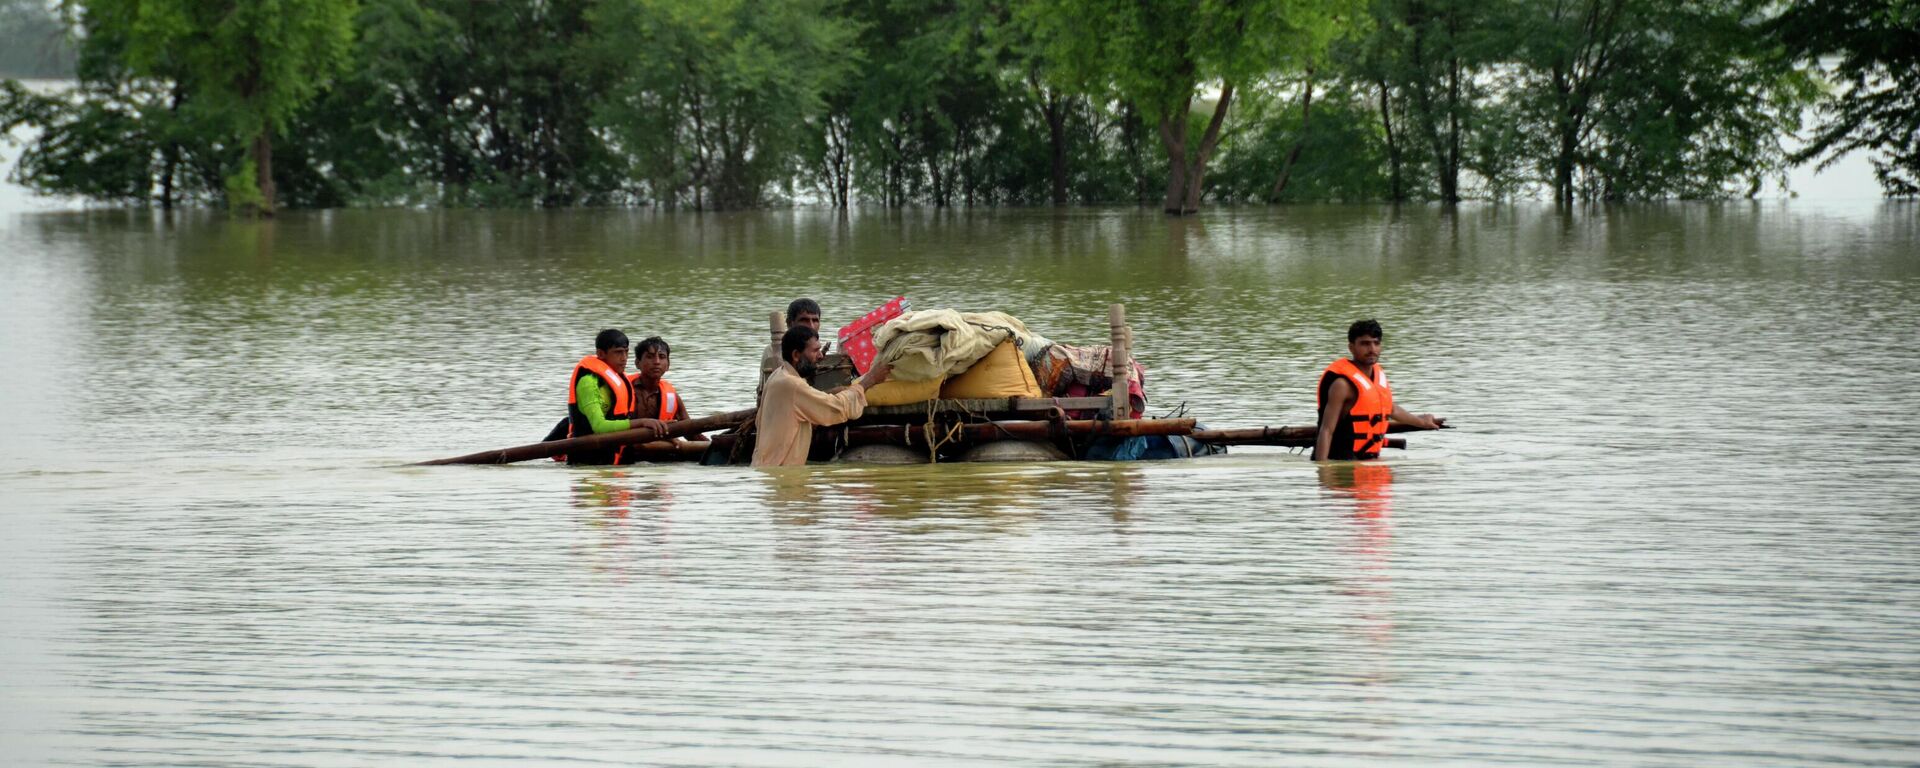 Displaced people transport usable belongings salvaged from their flood-hit home as they cross a flooded area in Sohbat Pur city of Jaffarabad, a district of Pakistan's southwestern Baluchistan province, Sunday, Aug. 28, 2022. - Sputnik International, 1920, 29.08.2022